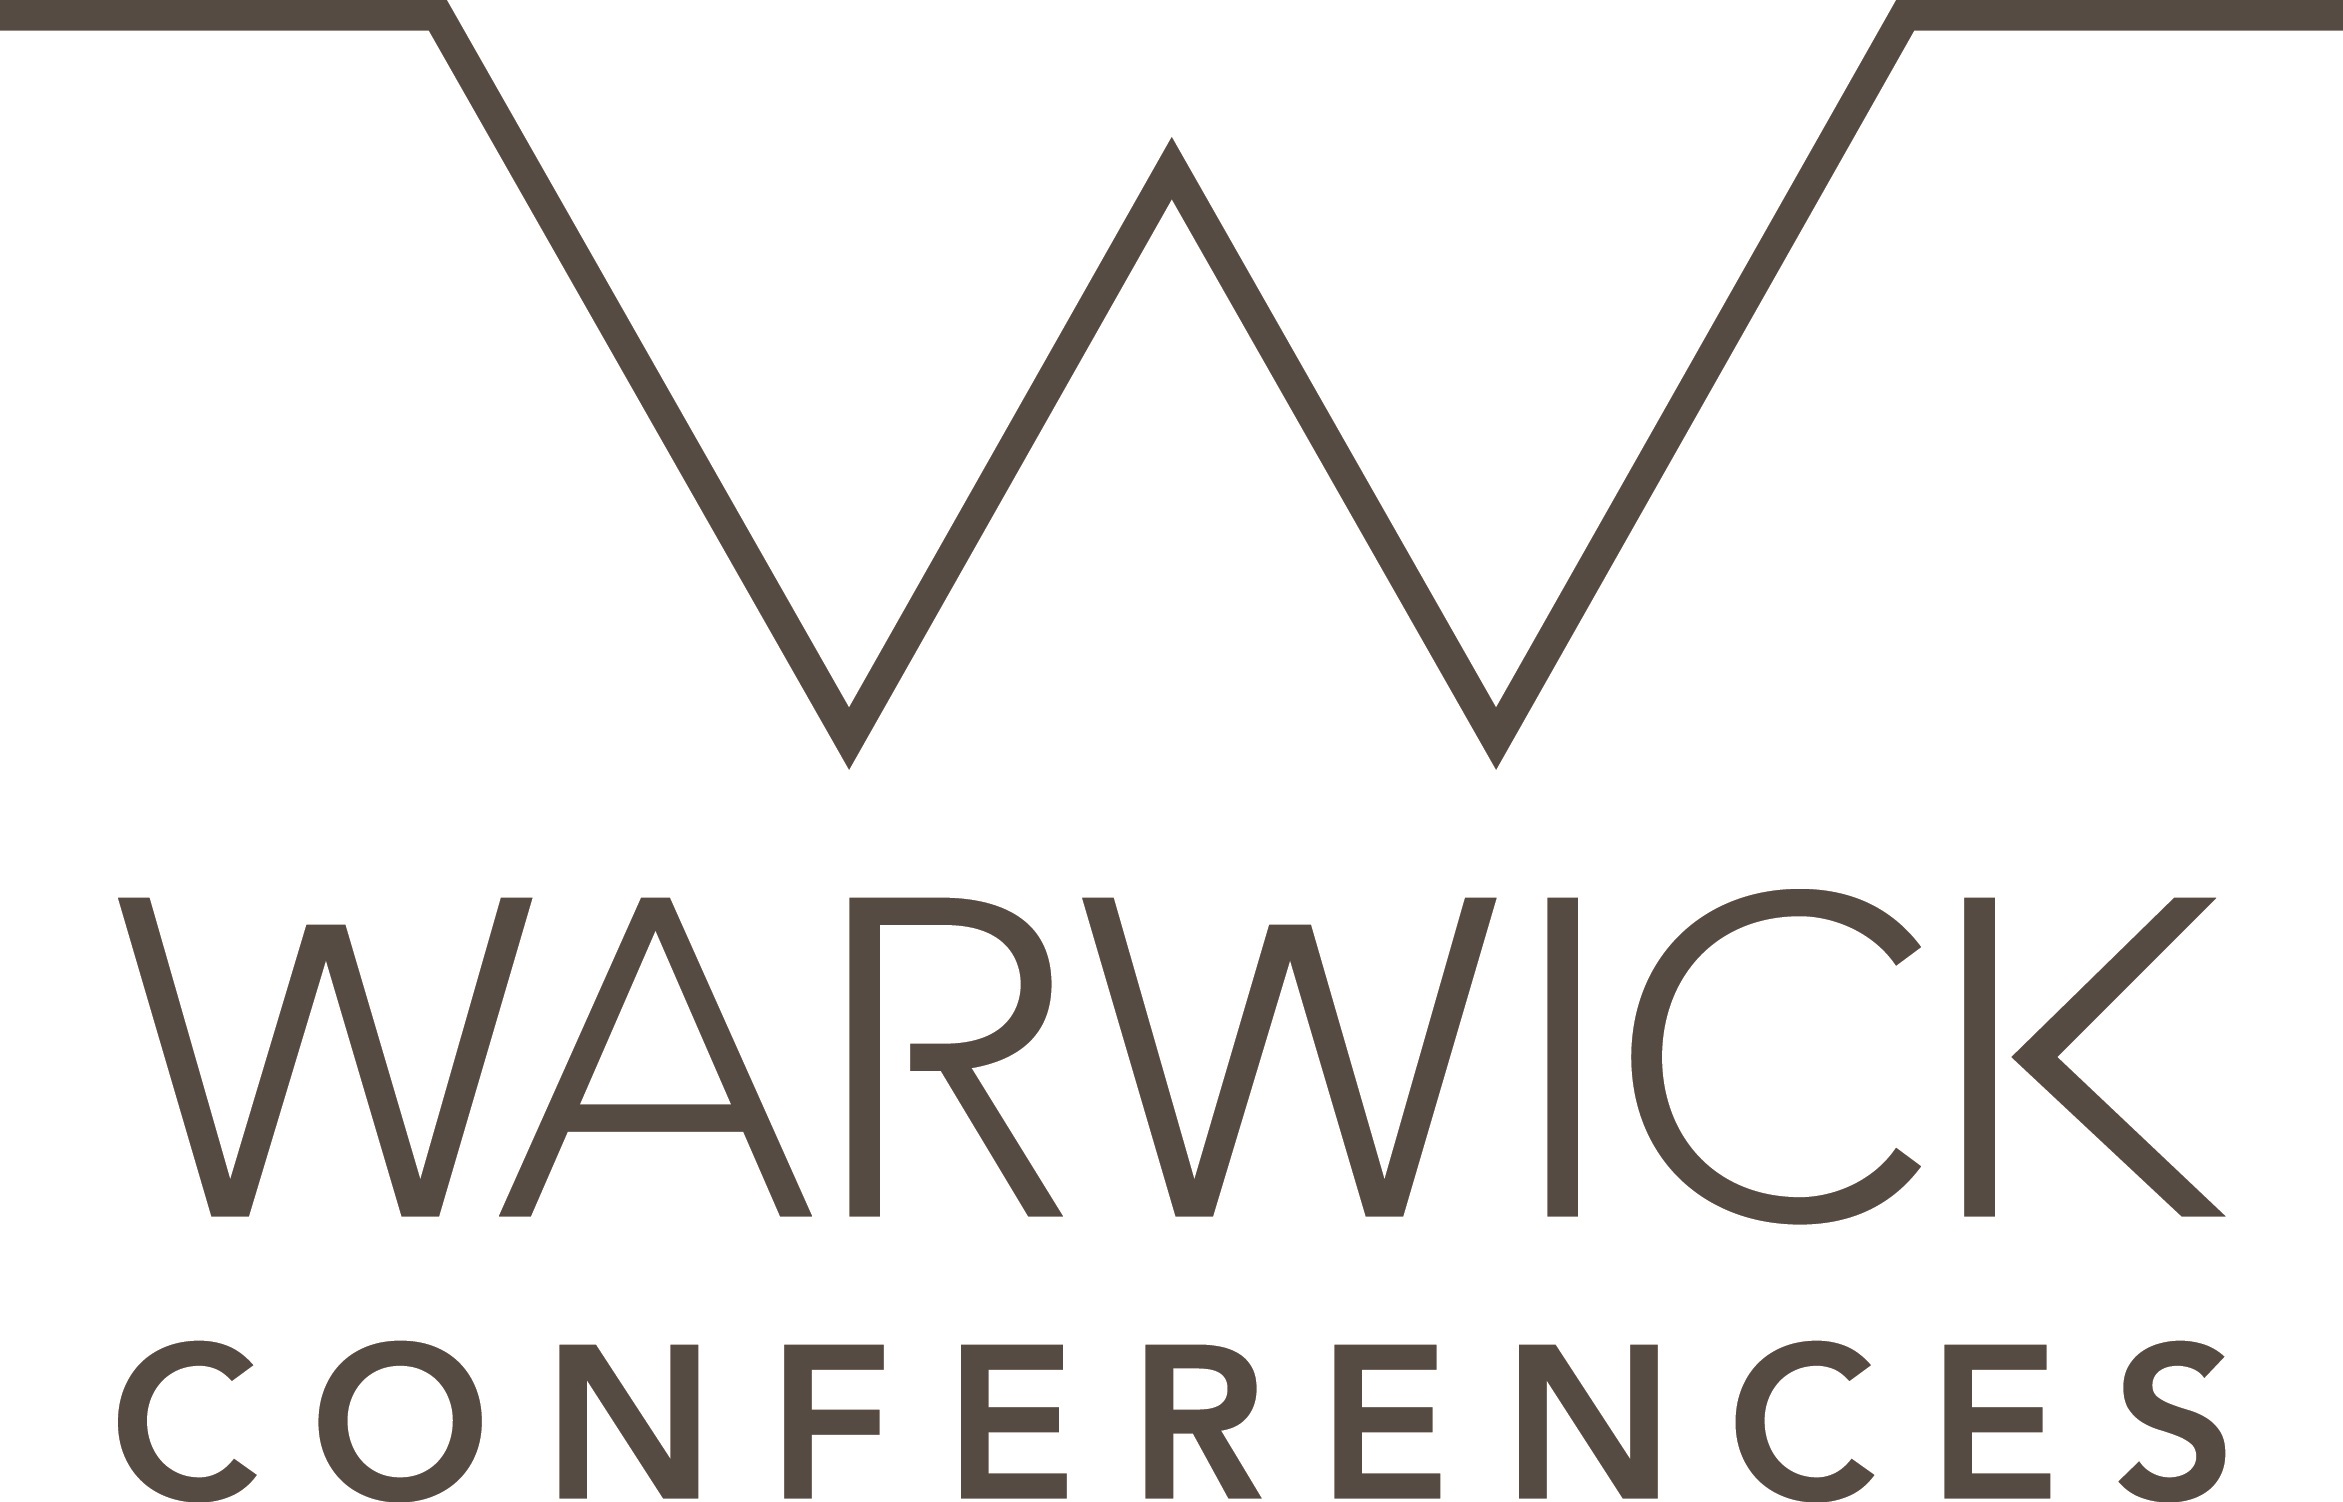 Warwick Conferences enjoys successful night at M&IT Awards